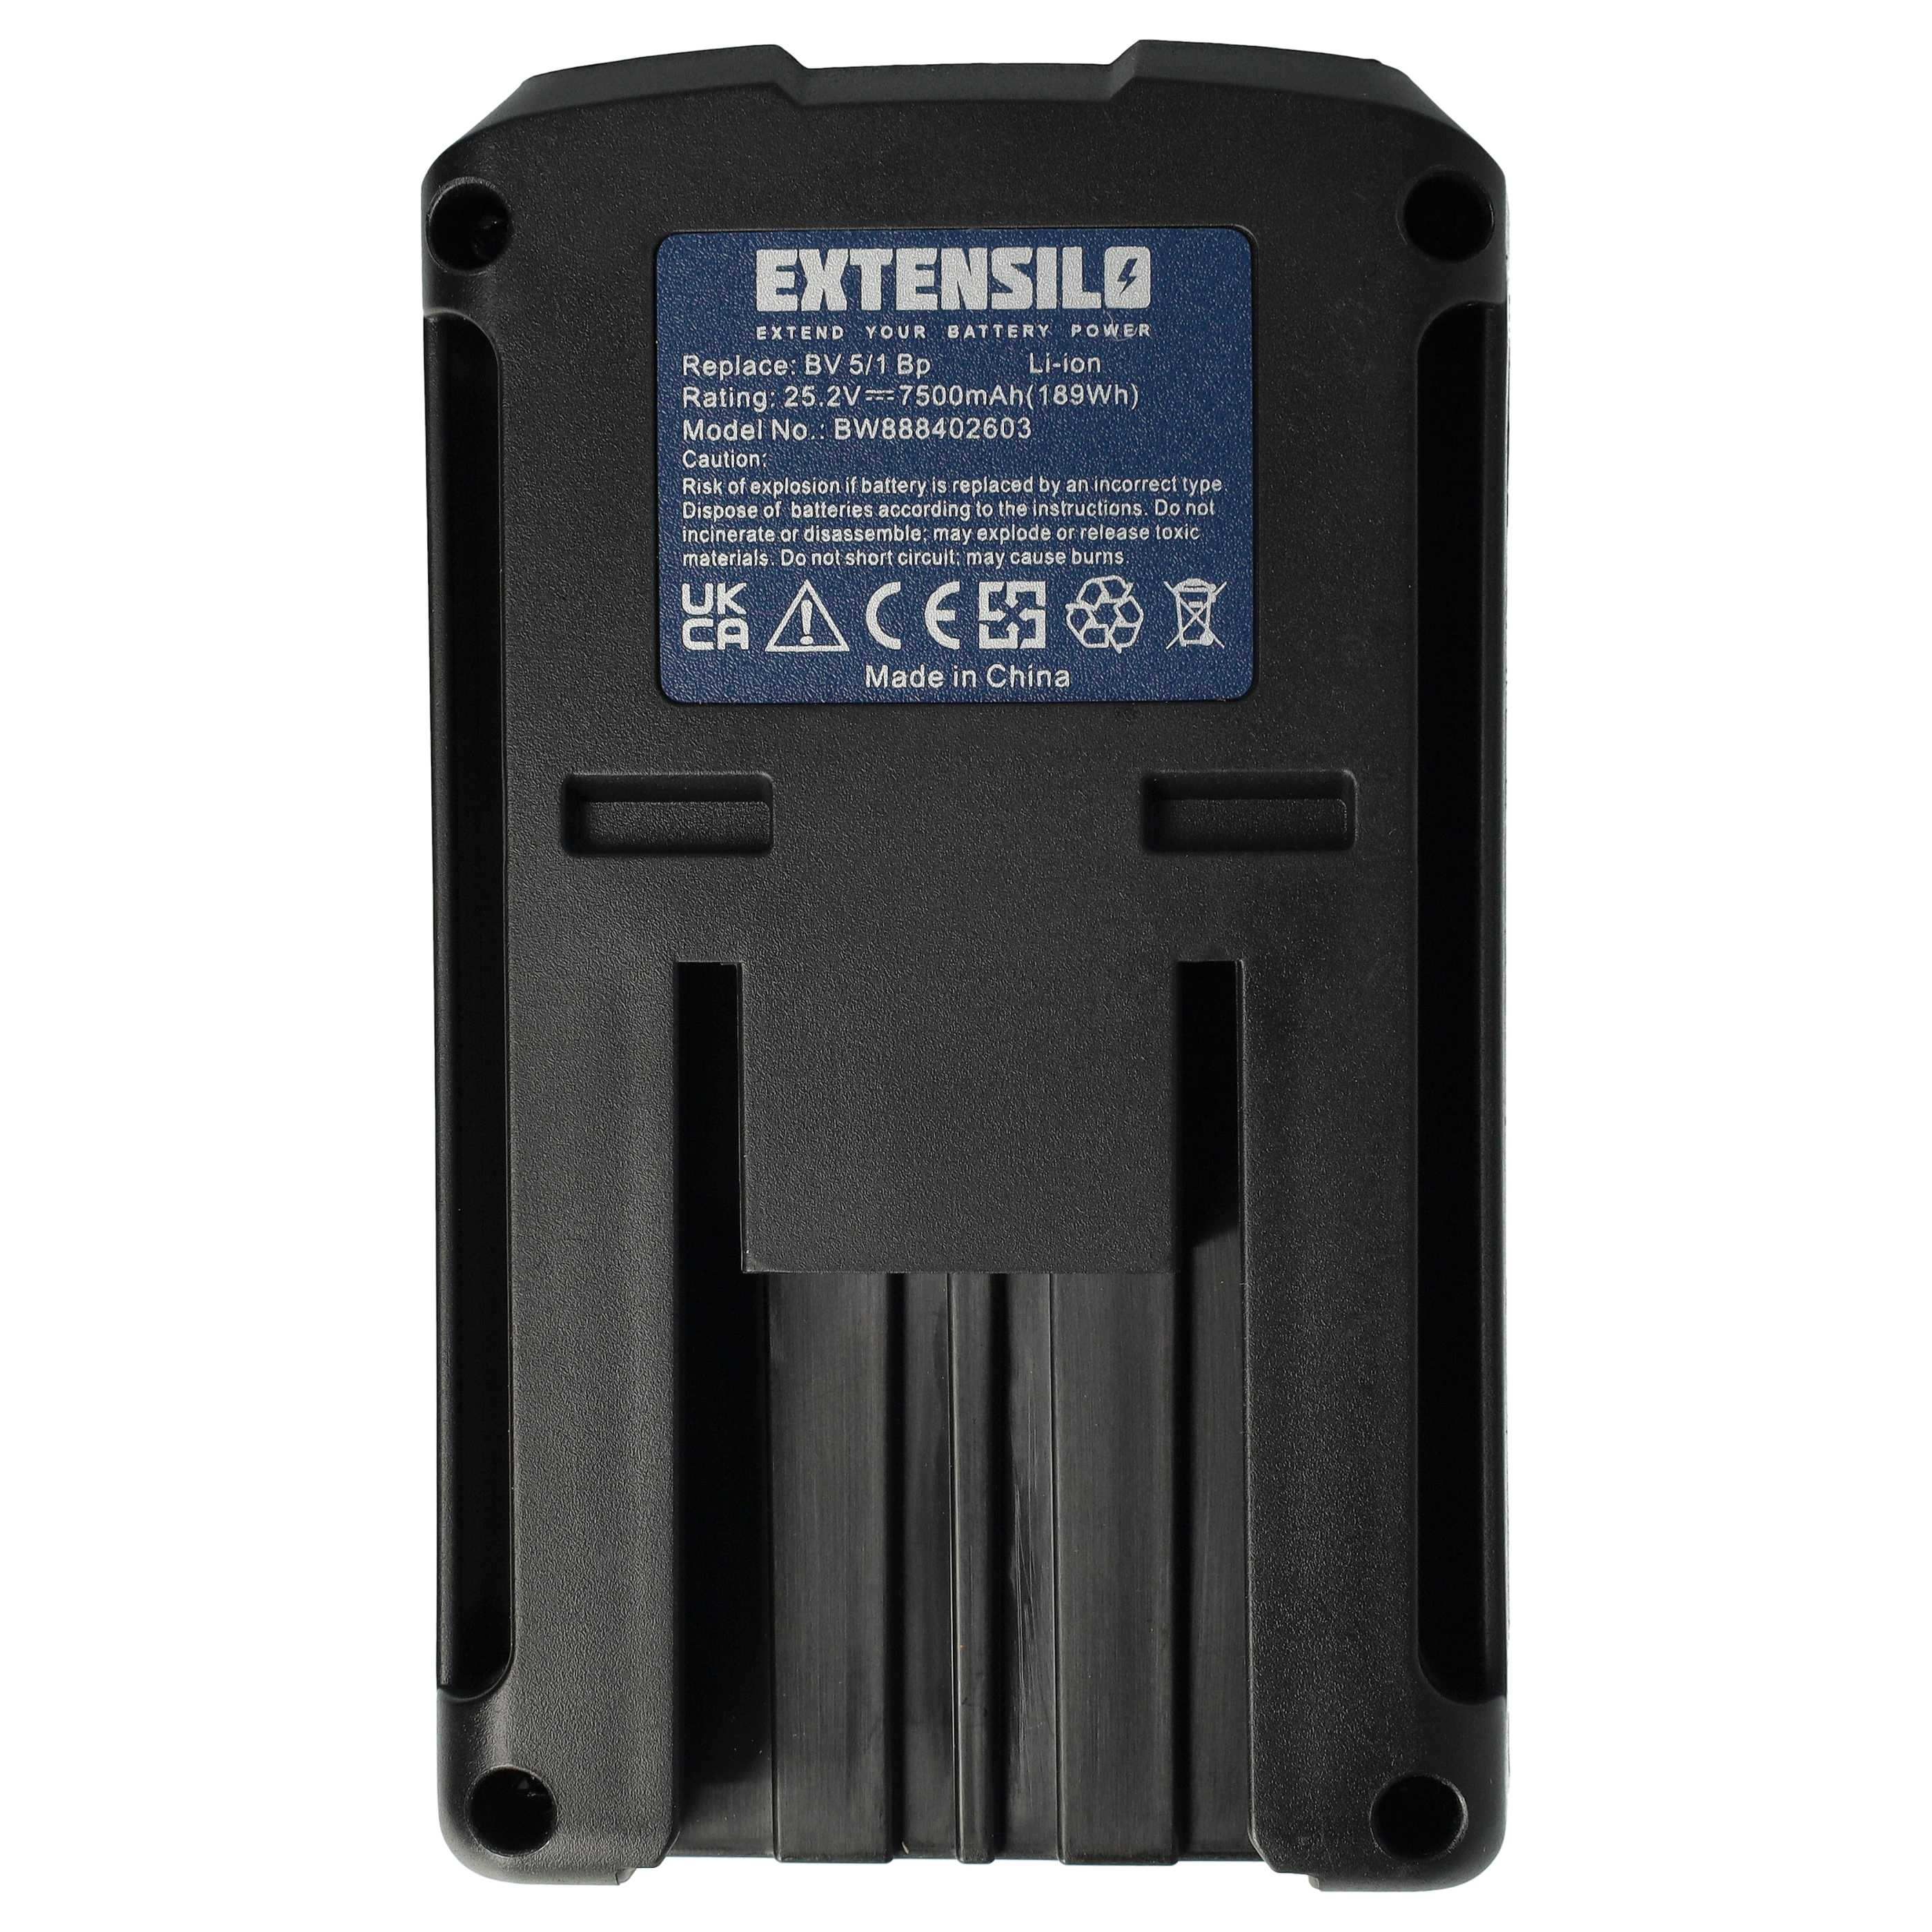 Battery Replacement for Kärcher 6.654-255.0, 6.654-183.0, 66541830, 6.654-284.0 for - 7500mAh, 25.2V, Li-Ion